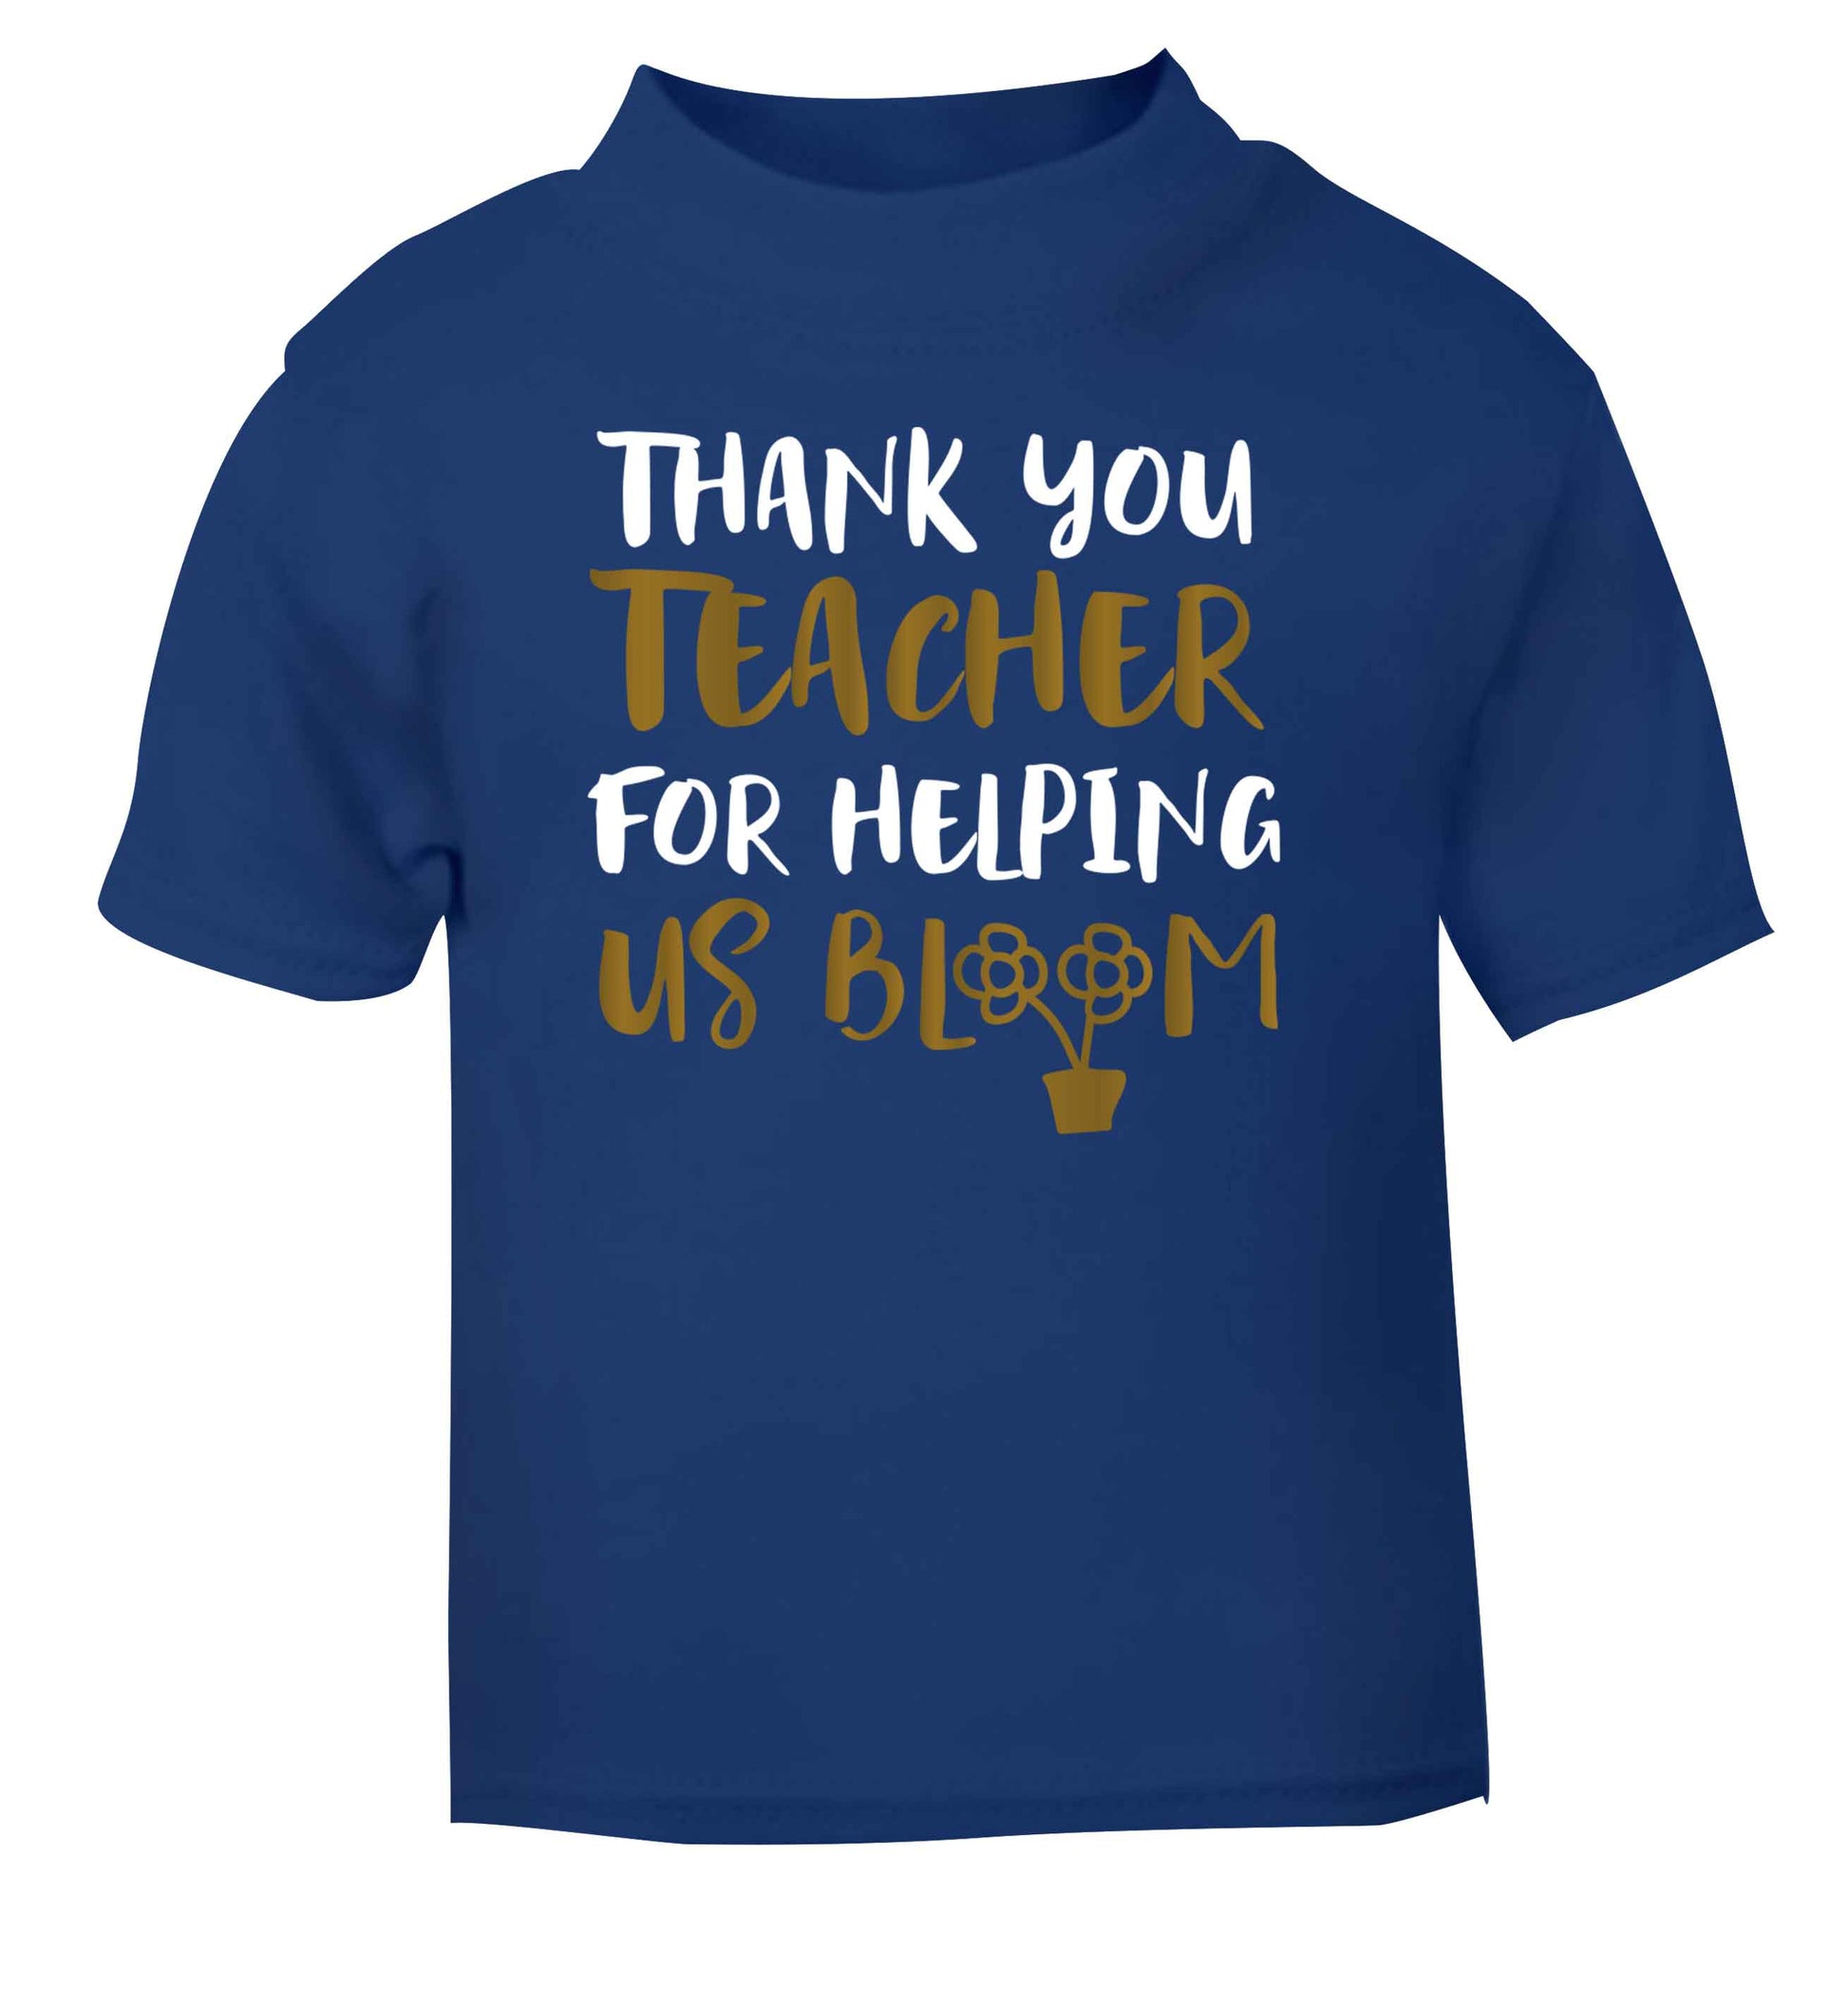 Thank you teacher for helping us bloom blue Baby Toddler Tshirt 2 Years